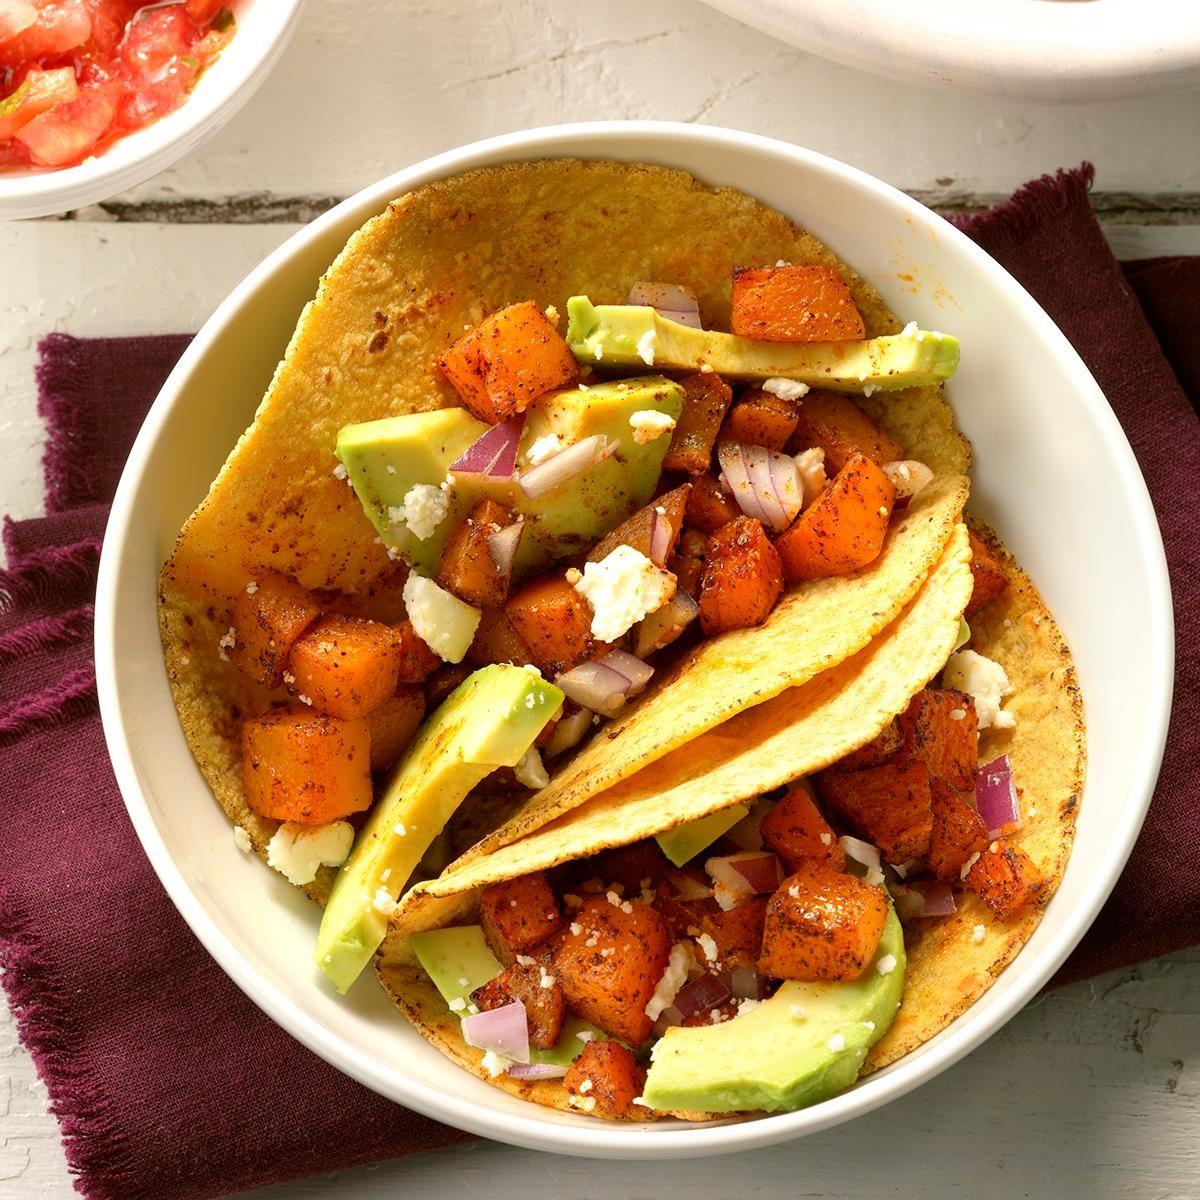 Day 15: Roasted Butternut Squash Tacos